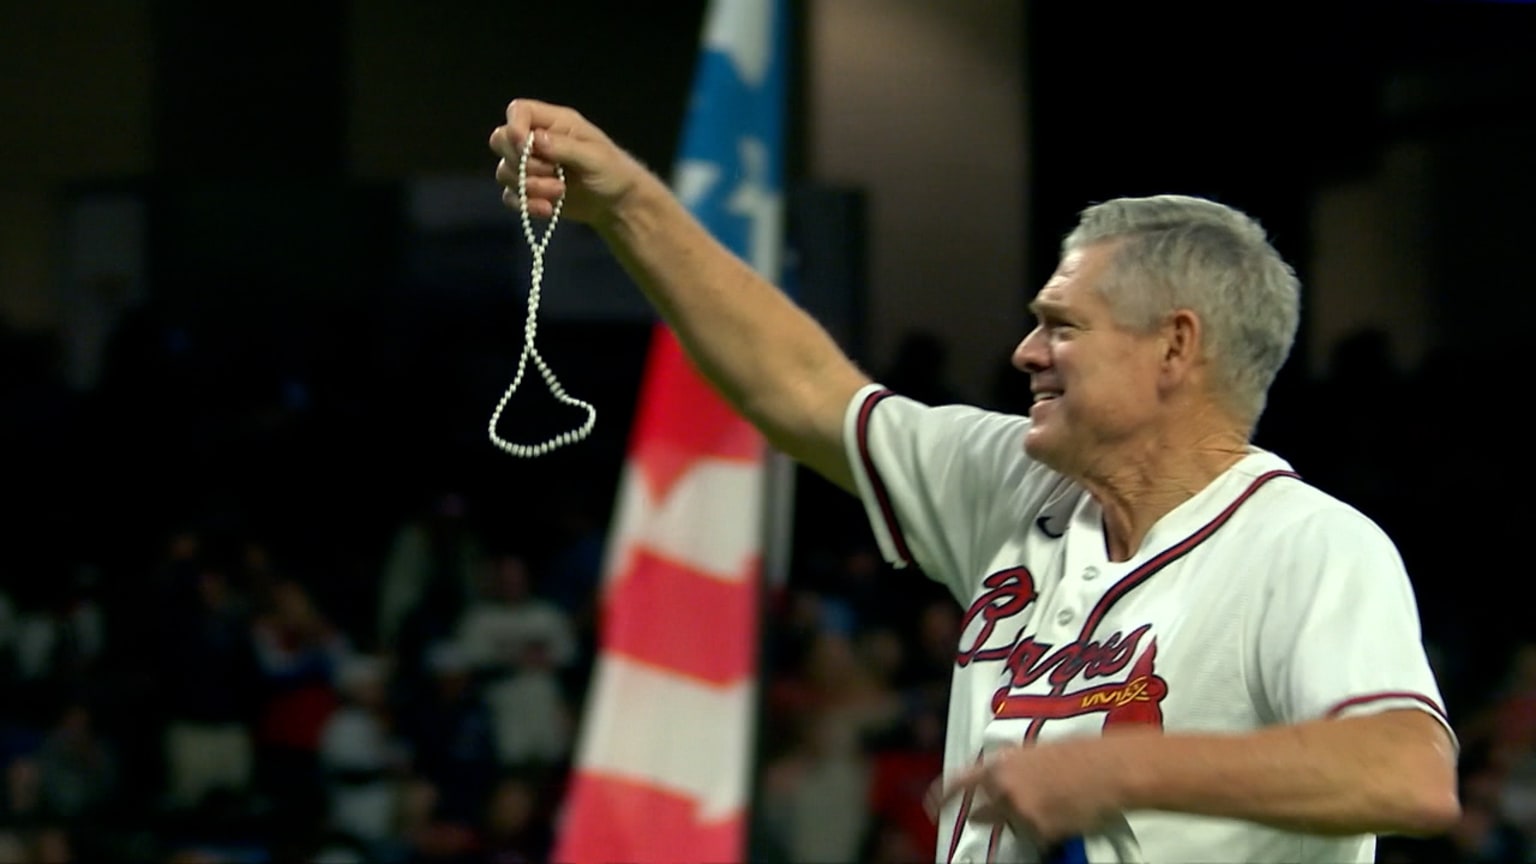 This Day in Braves History: Dale Murphy's consecutive games streak